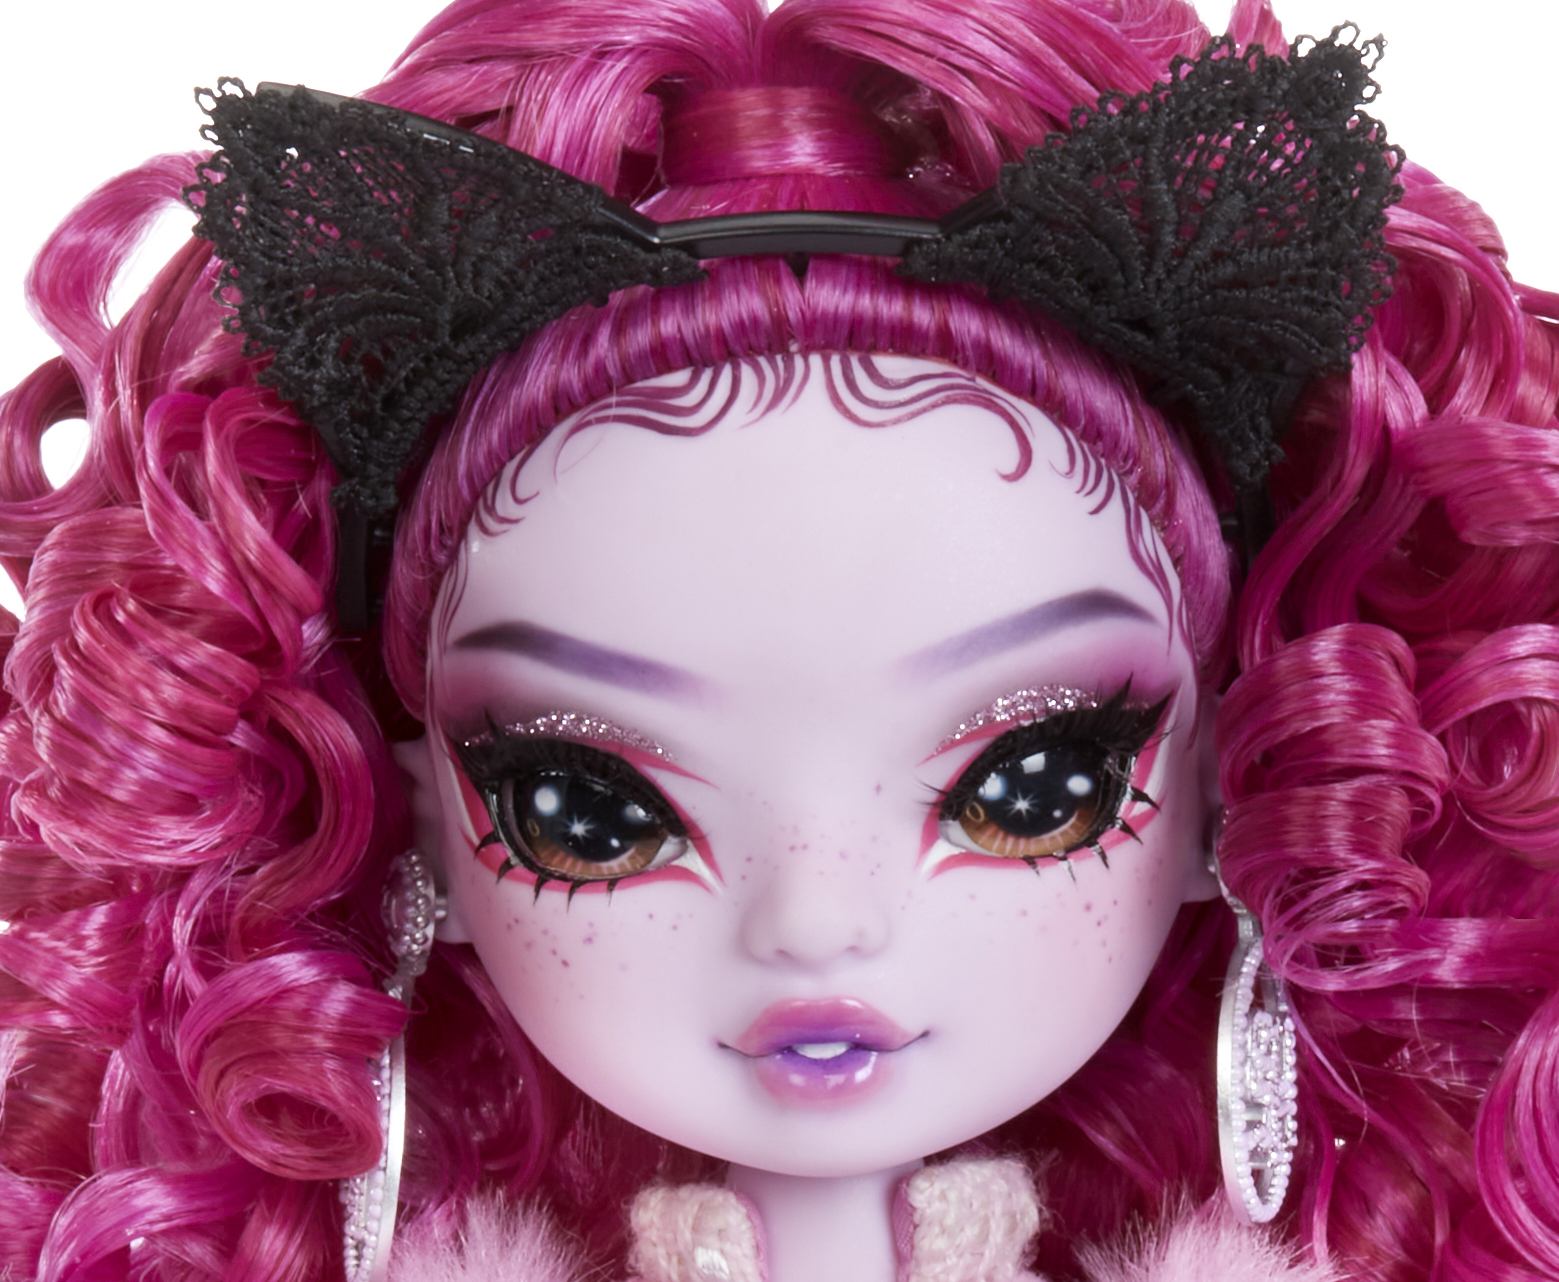 Rainbow High Shadow High Rainbow Vision Costume Ball dolls 2022: Spider, Vampire, Warecat, Fairy, Witch and Kitty - YouLoveIt.com